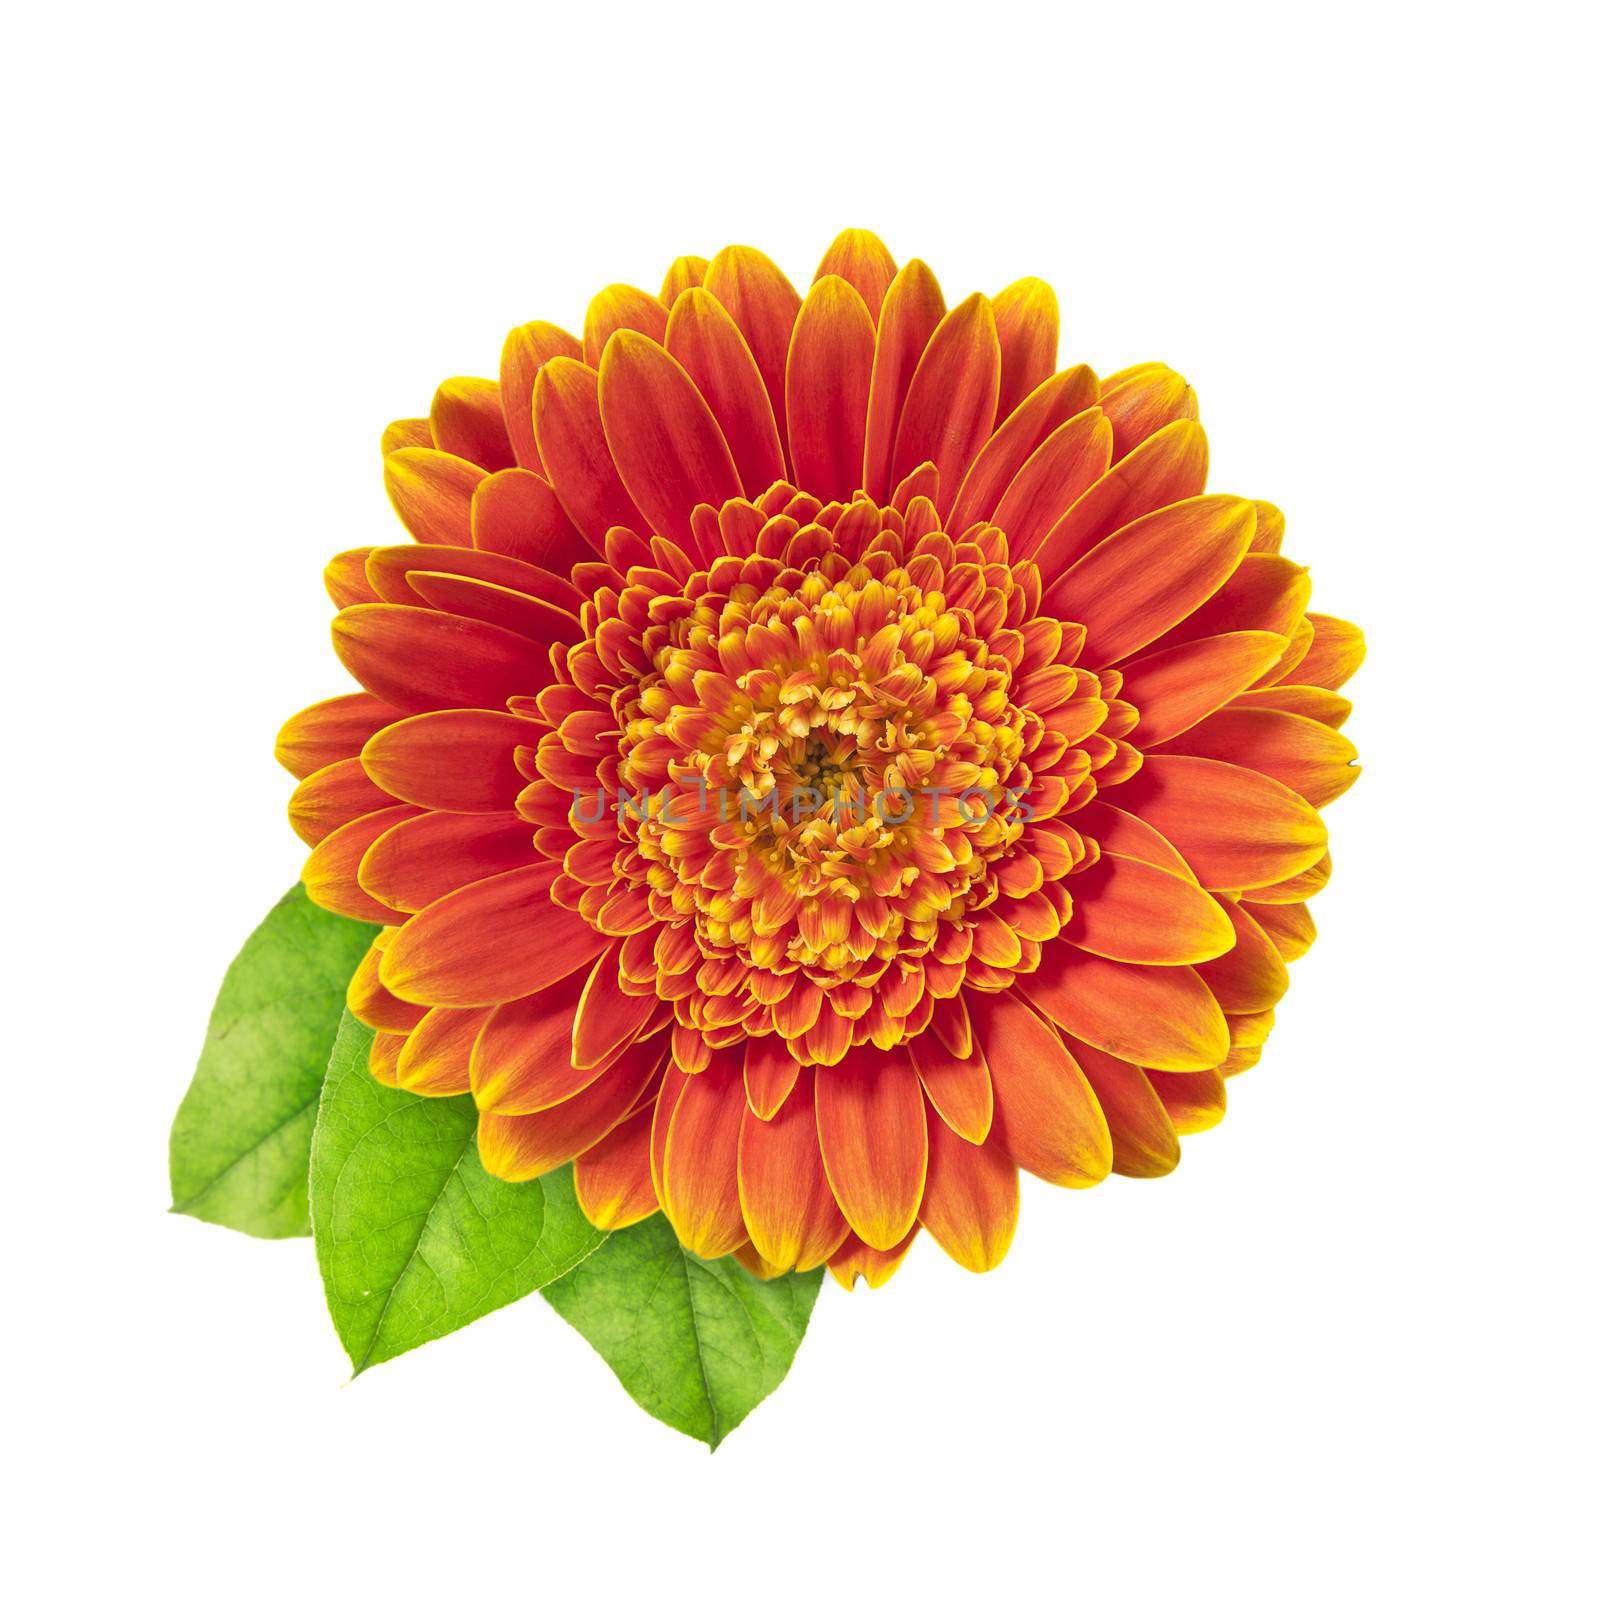 Orange gerberas daisy with three leaves isolated on a white background.